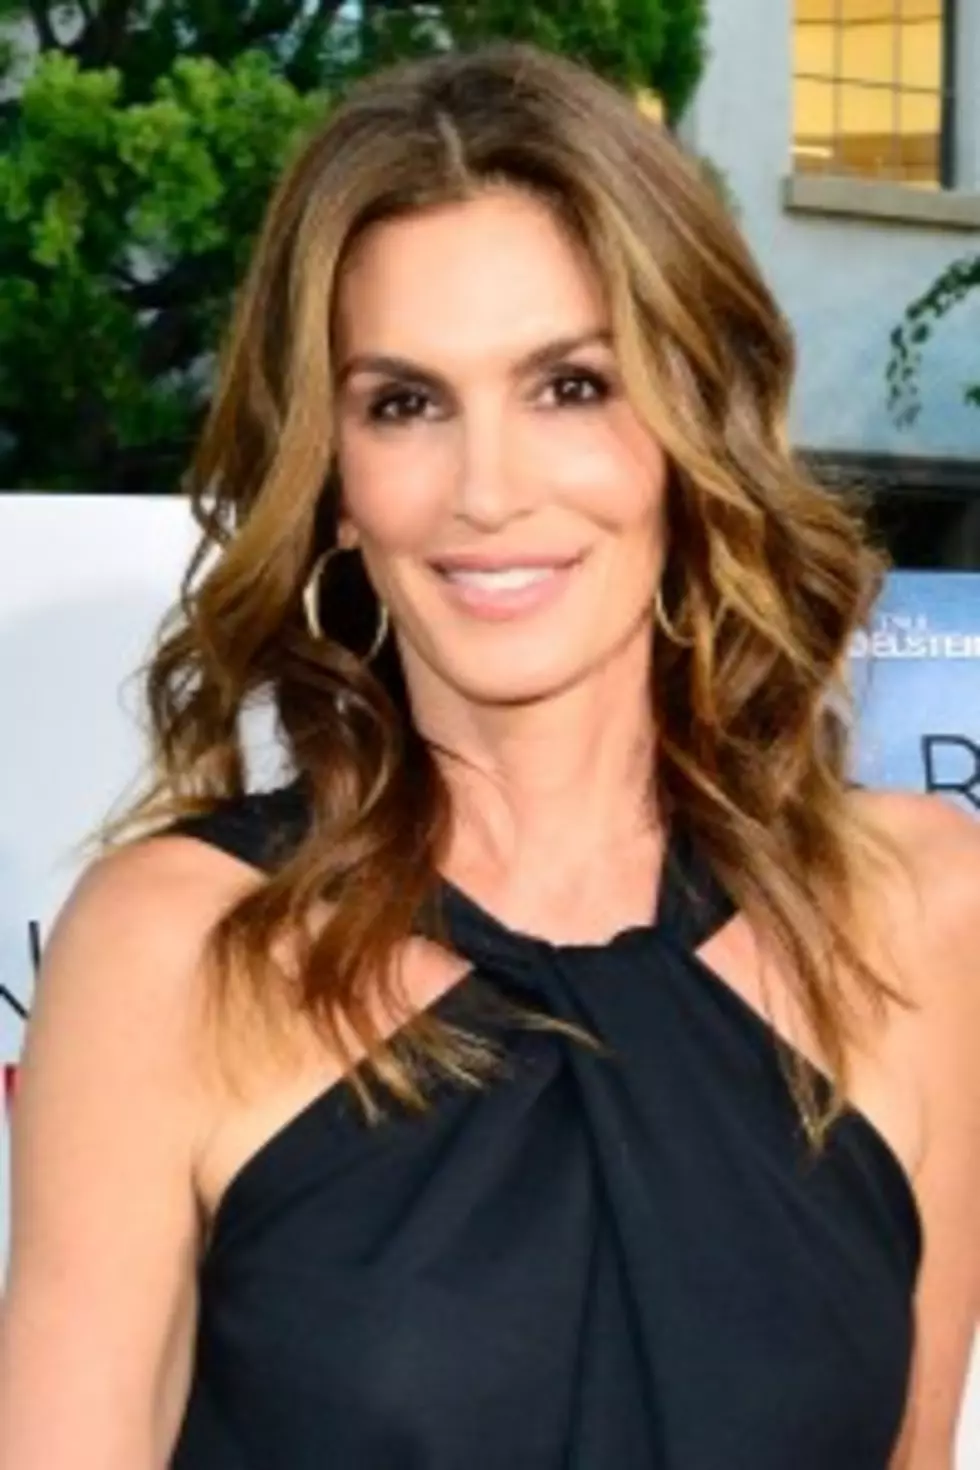 The Real Reason Stateline Native Cindy Crawford Kept Her Mole